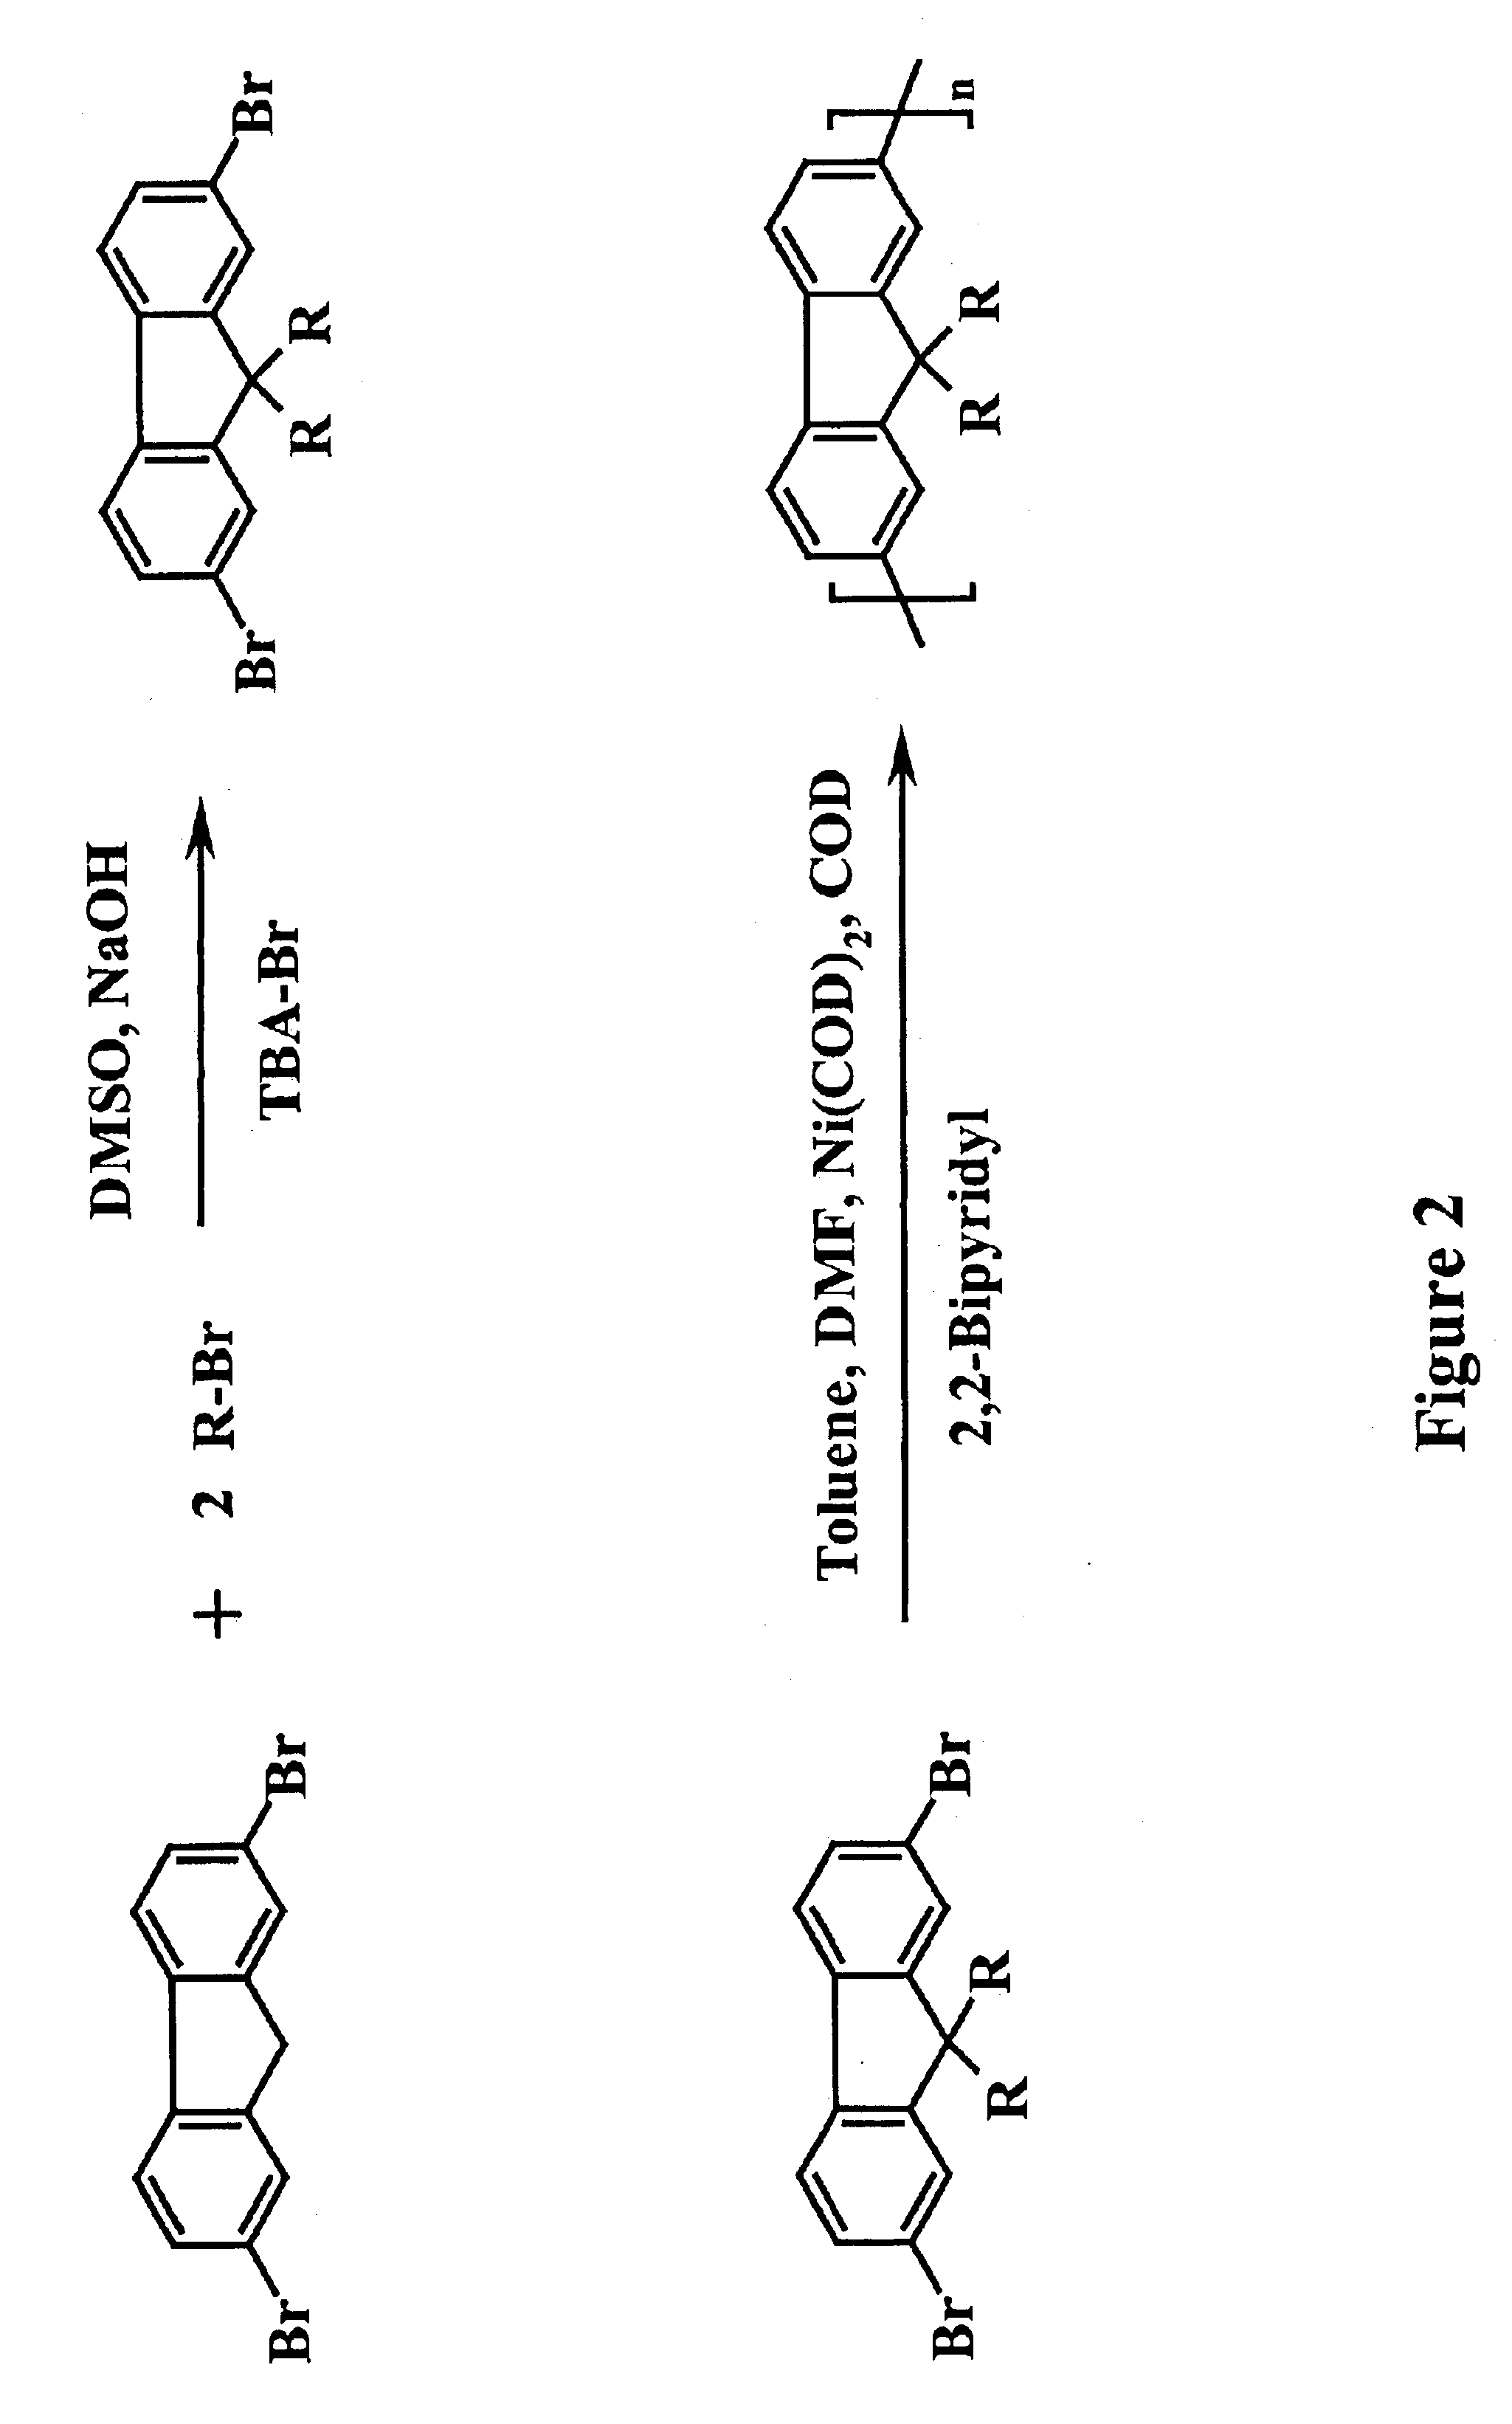 Methods to purify polymers